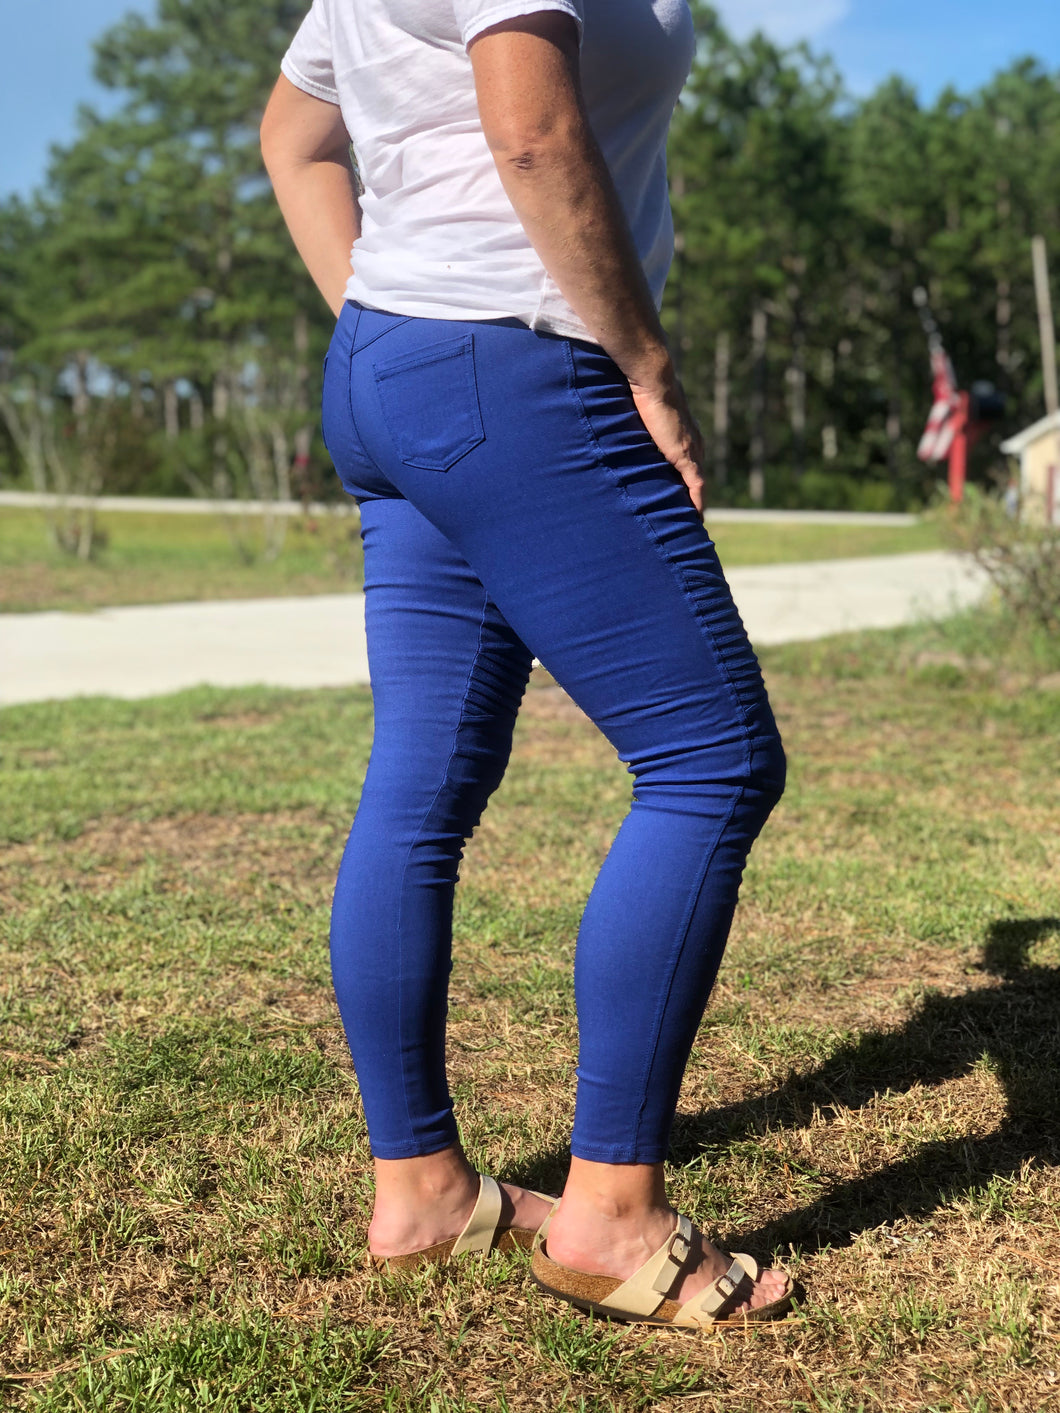 side view of royal blue moto jeggings with real back pockets and an elastic waistband. can be worn everyday casual or with a dressy top and heels. S/M fit- 2-6. M/L fit- 8-10